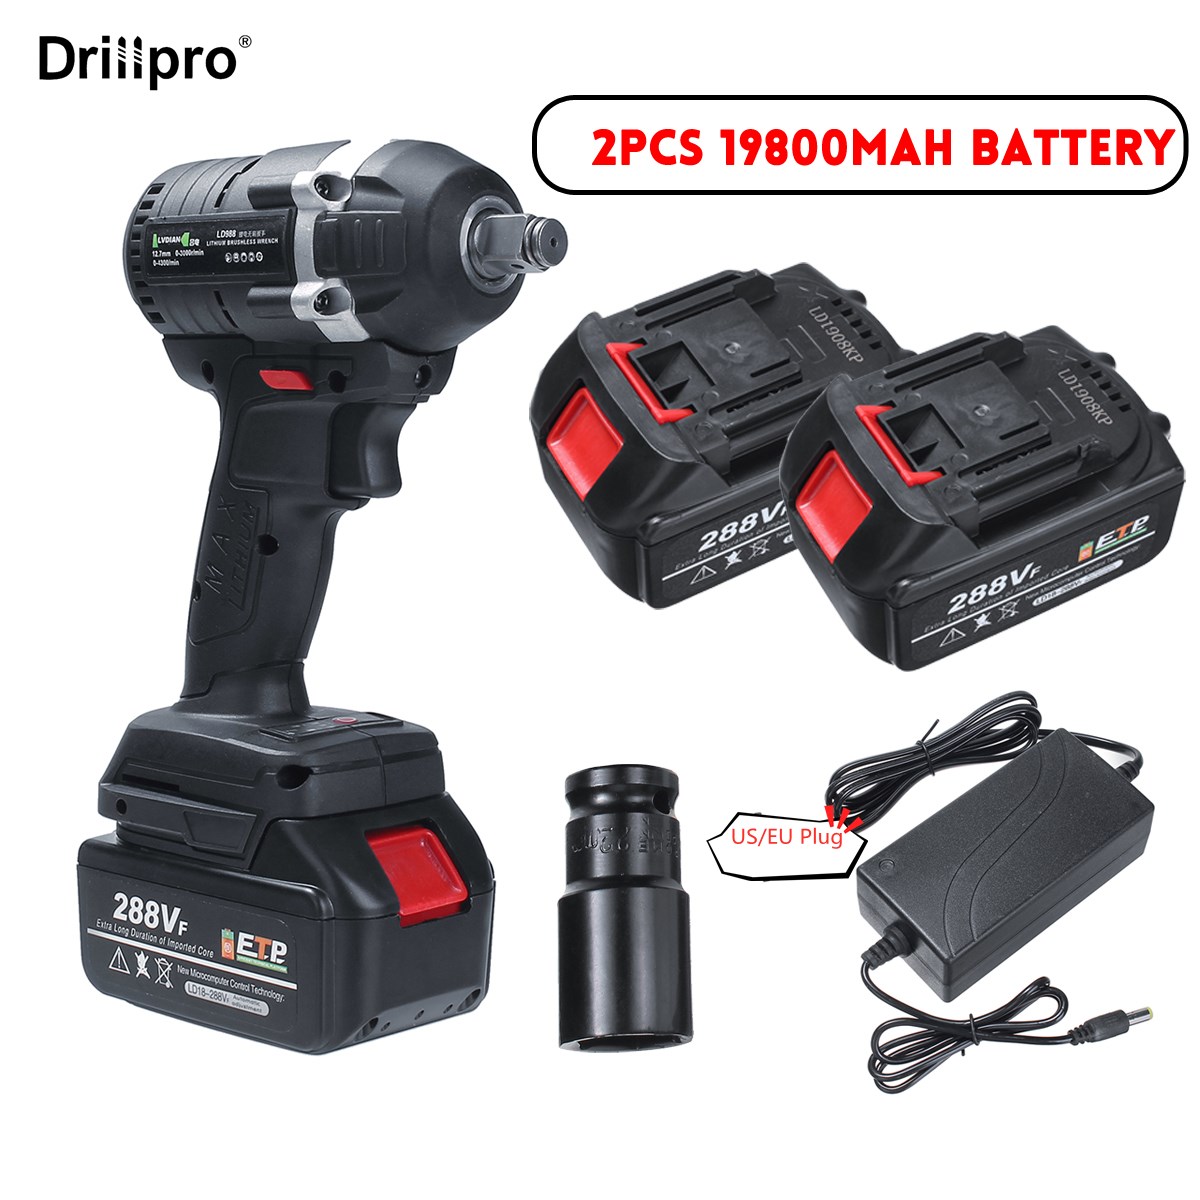 Drillpro 630N.m 288VF Cordless Electric Impact Wrench Powerful Tool 3 IN 1 Switch Brushless Built-in LED Wrench With 2Batteries